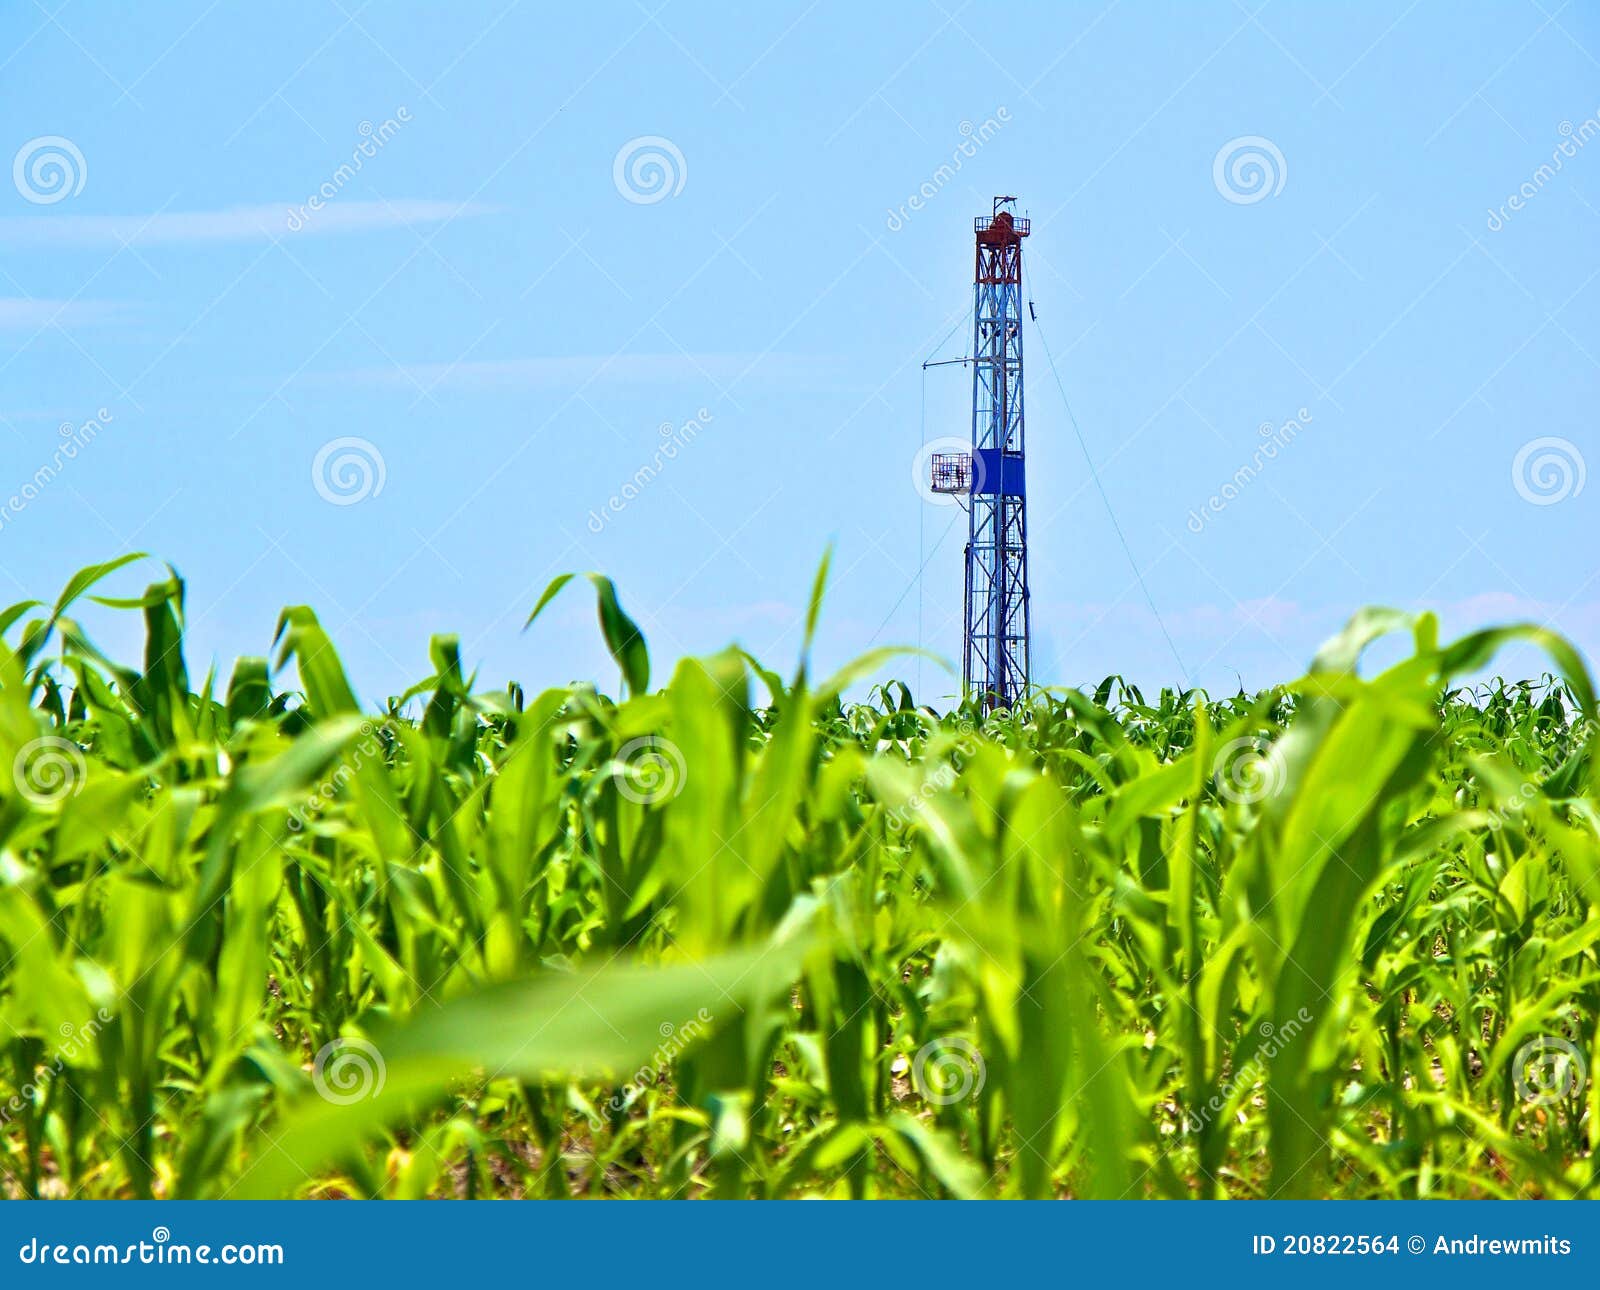 natural gas fracking drill in cornfield